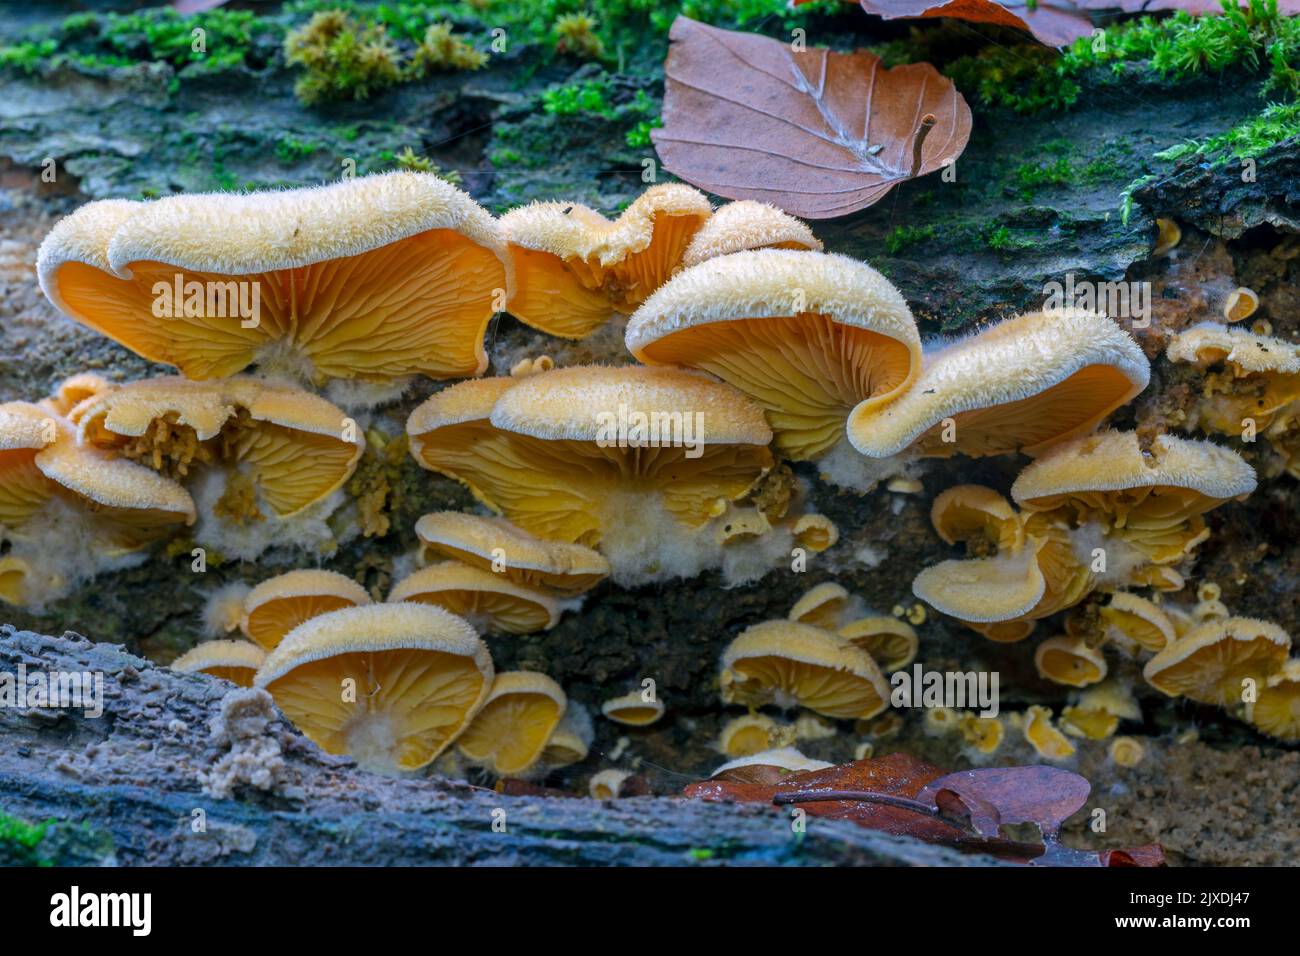 Orange Oyster, Mock Oyster (Phyllotopsis nidulans) on the trunk of a decaying Common Beech. Germany Stock Photo